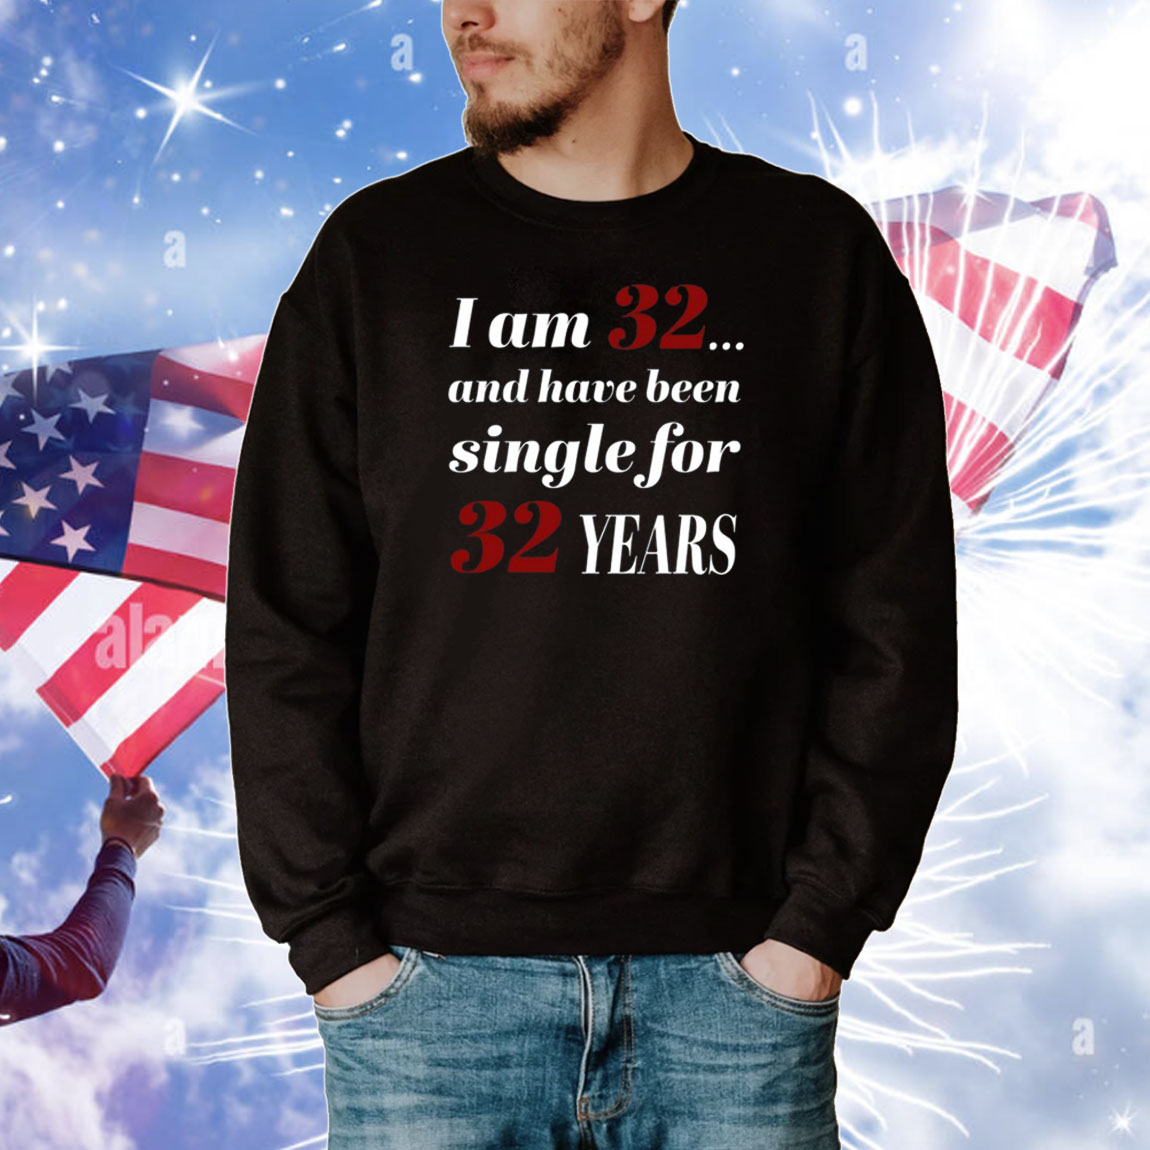 I Am 32 And Have Been Single For 32 Years Tee Shirts